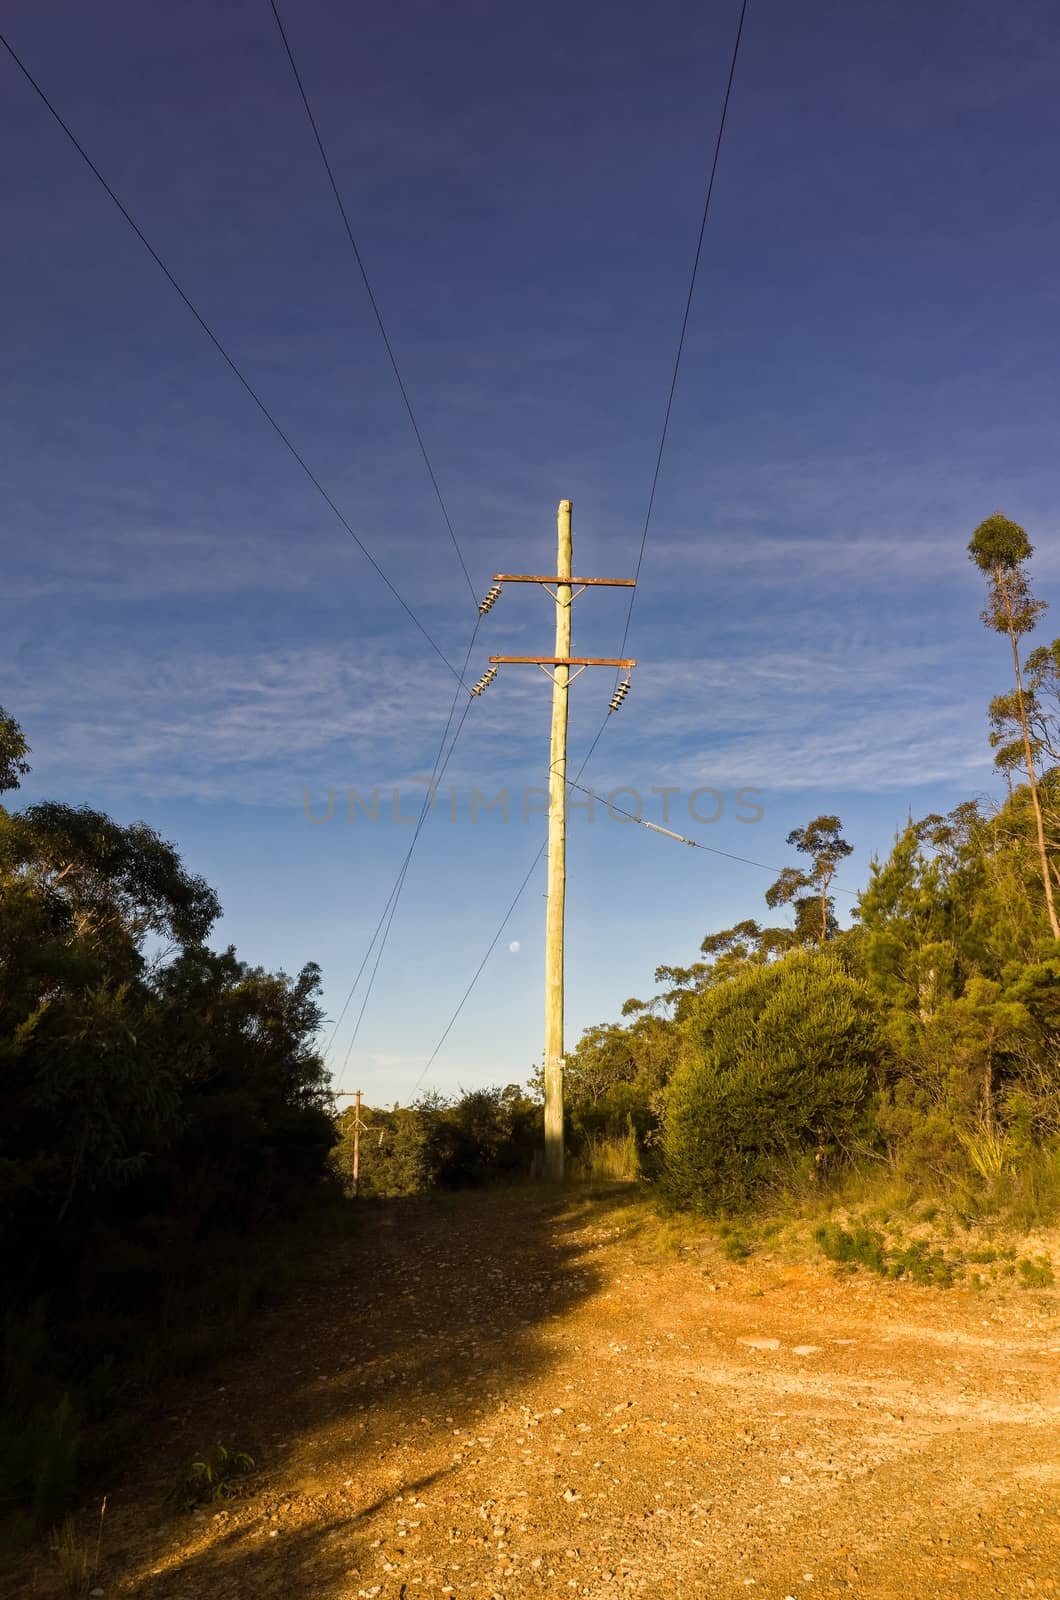 Photograph of the moon shining through electric poles on a sunny day in the Australian bush